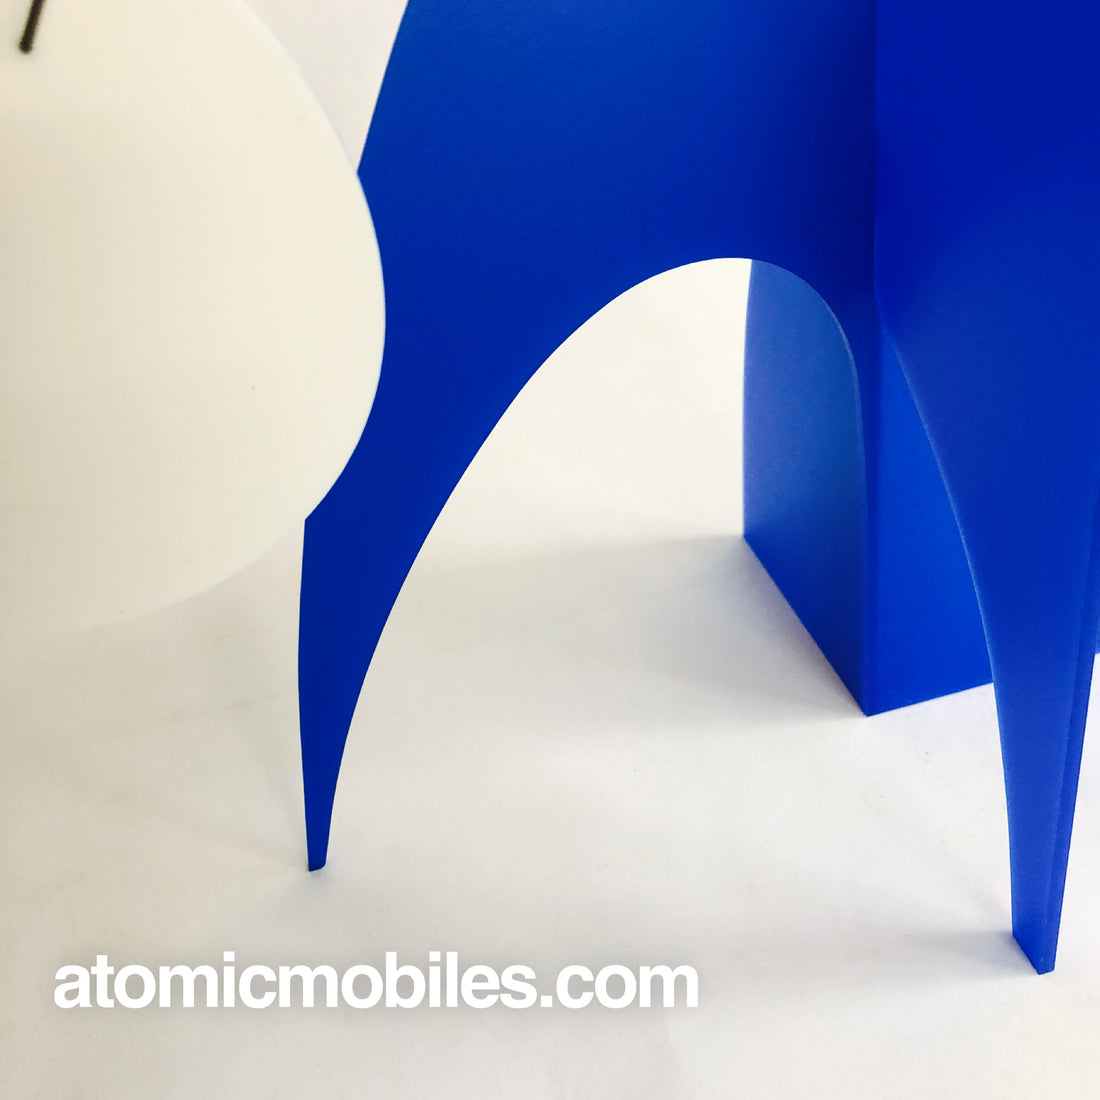 Gorgeous blue and white tabletop art piece - The Moderne by AtomicMobiles.com